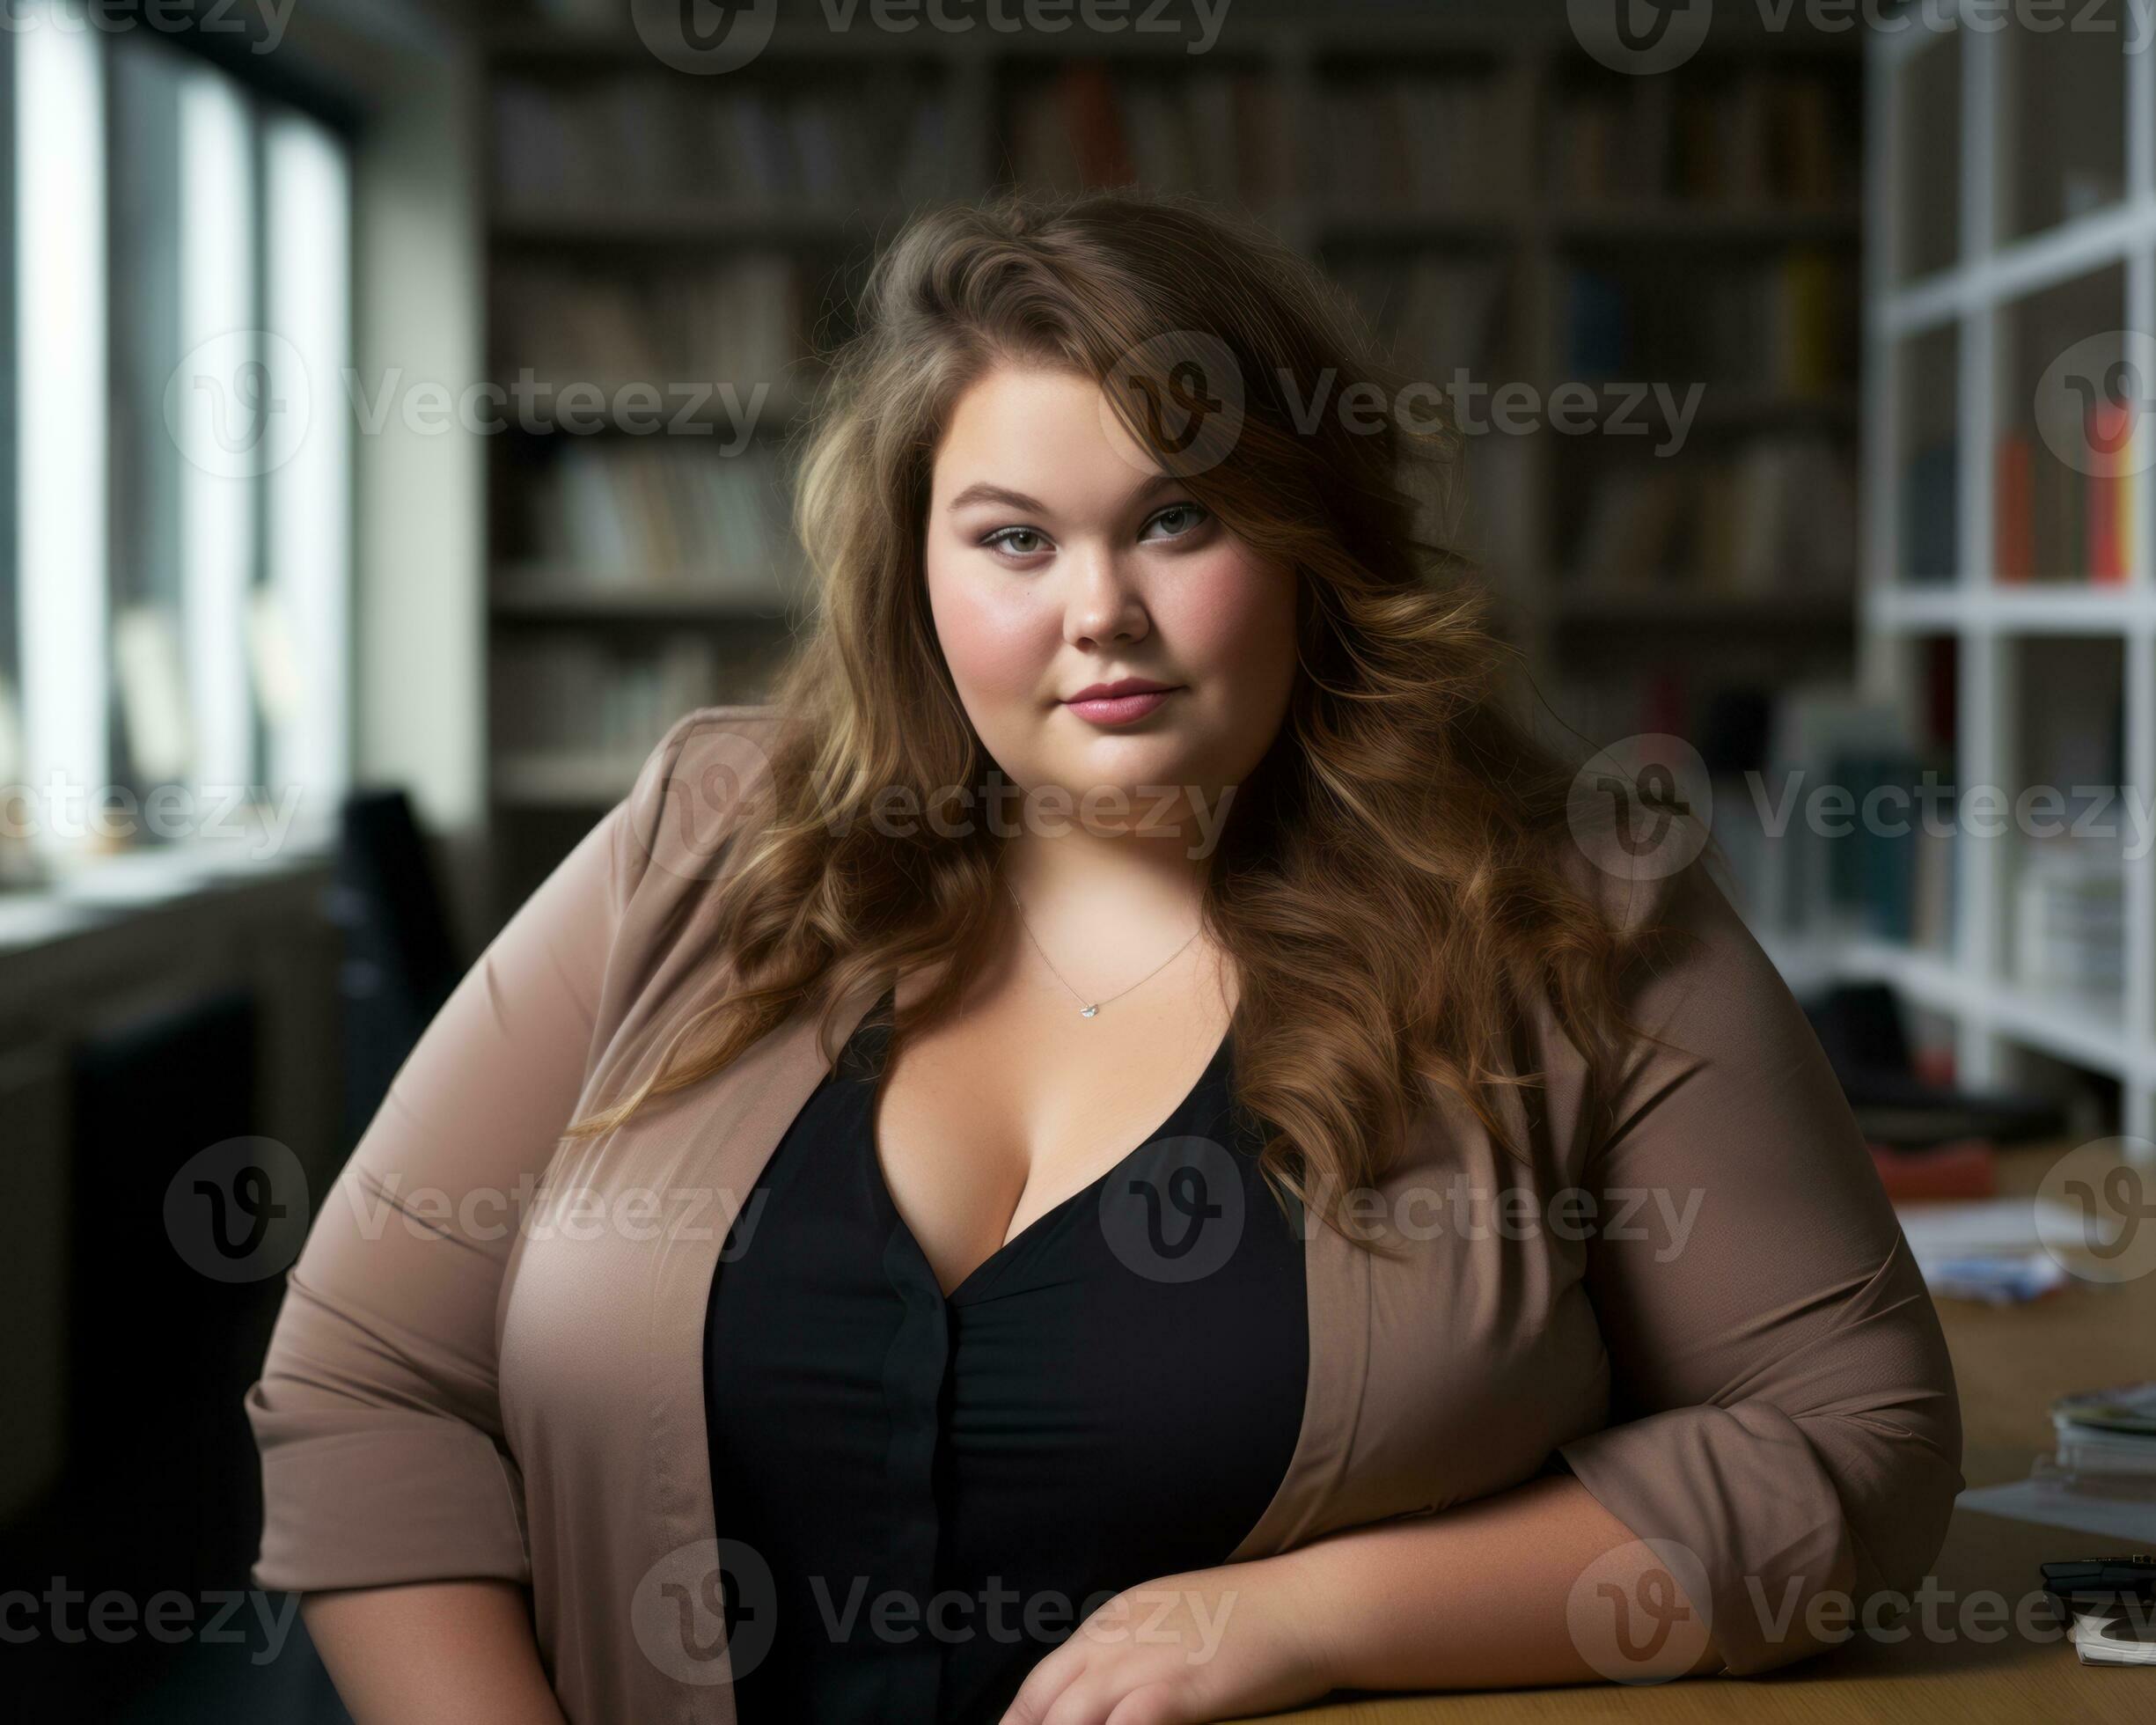 https://static.vecteezy.com/system/resources/previews/032/096/552/large_2x/a-woman-with-large-breasts-sitting-at-a-desk-generative-ai-photo.jpeg